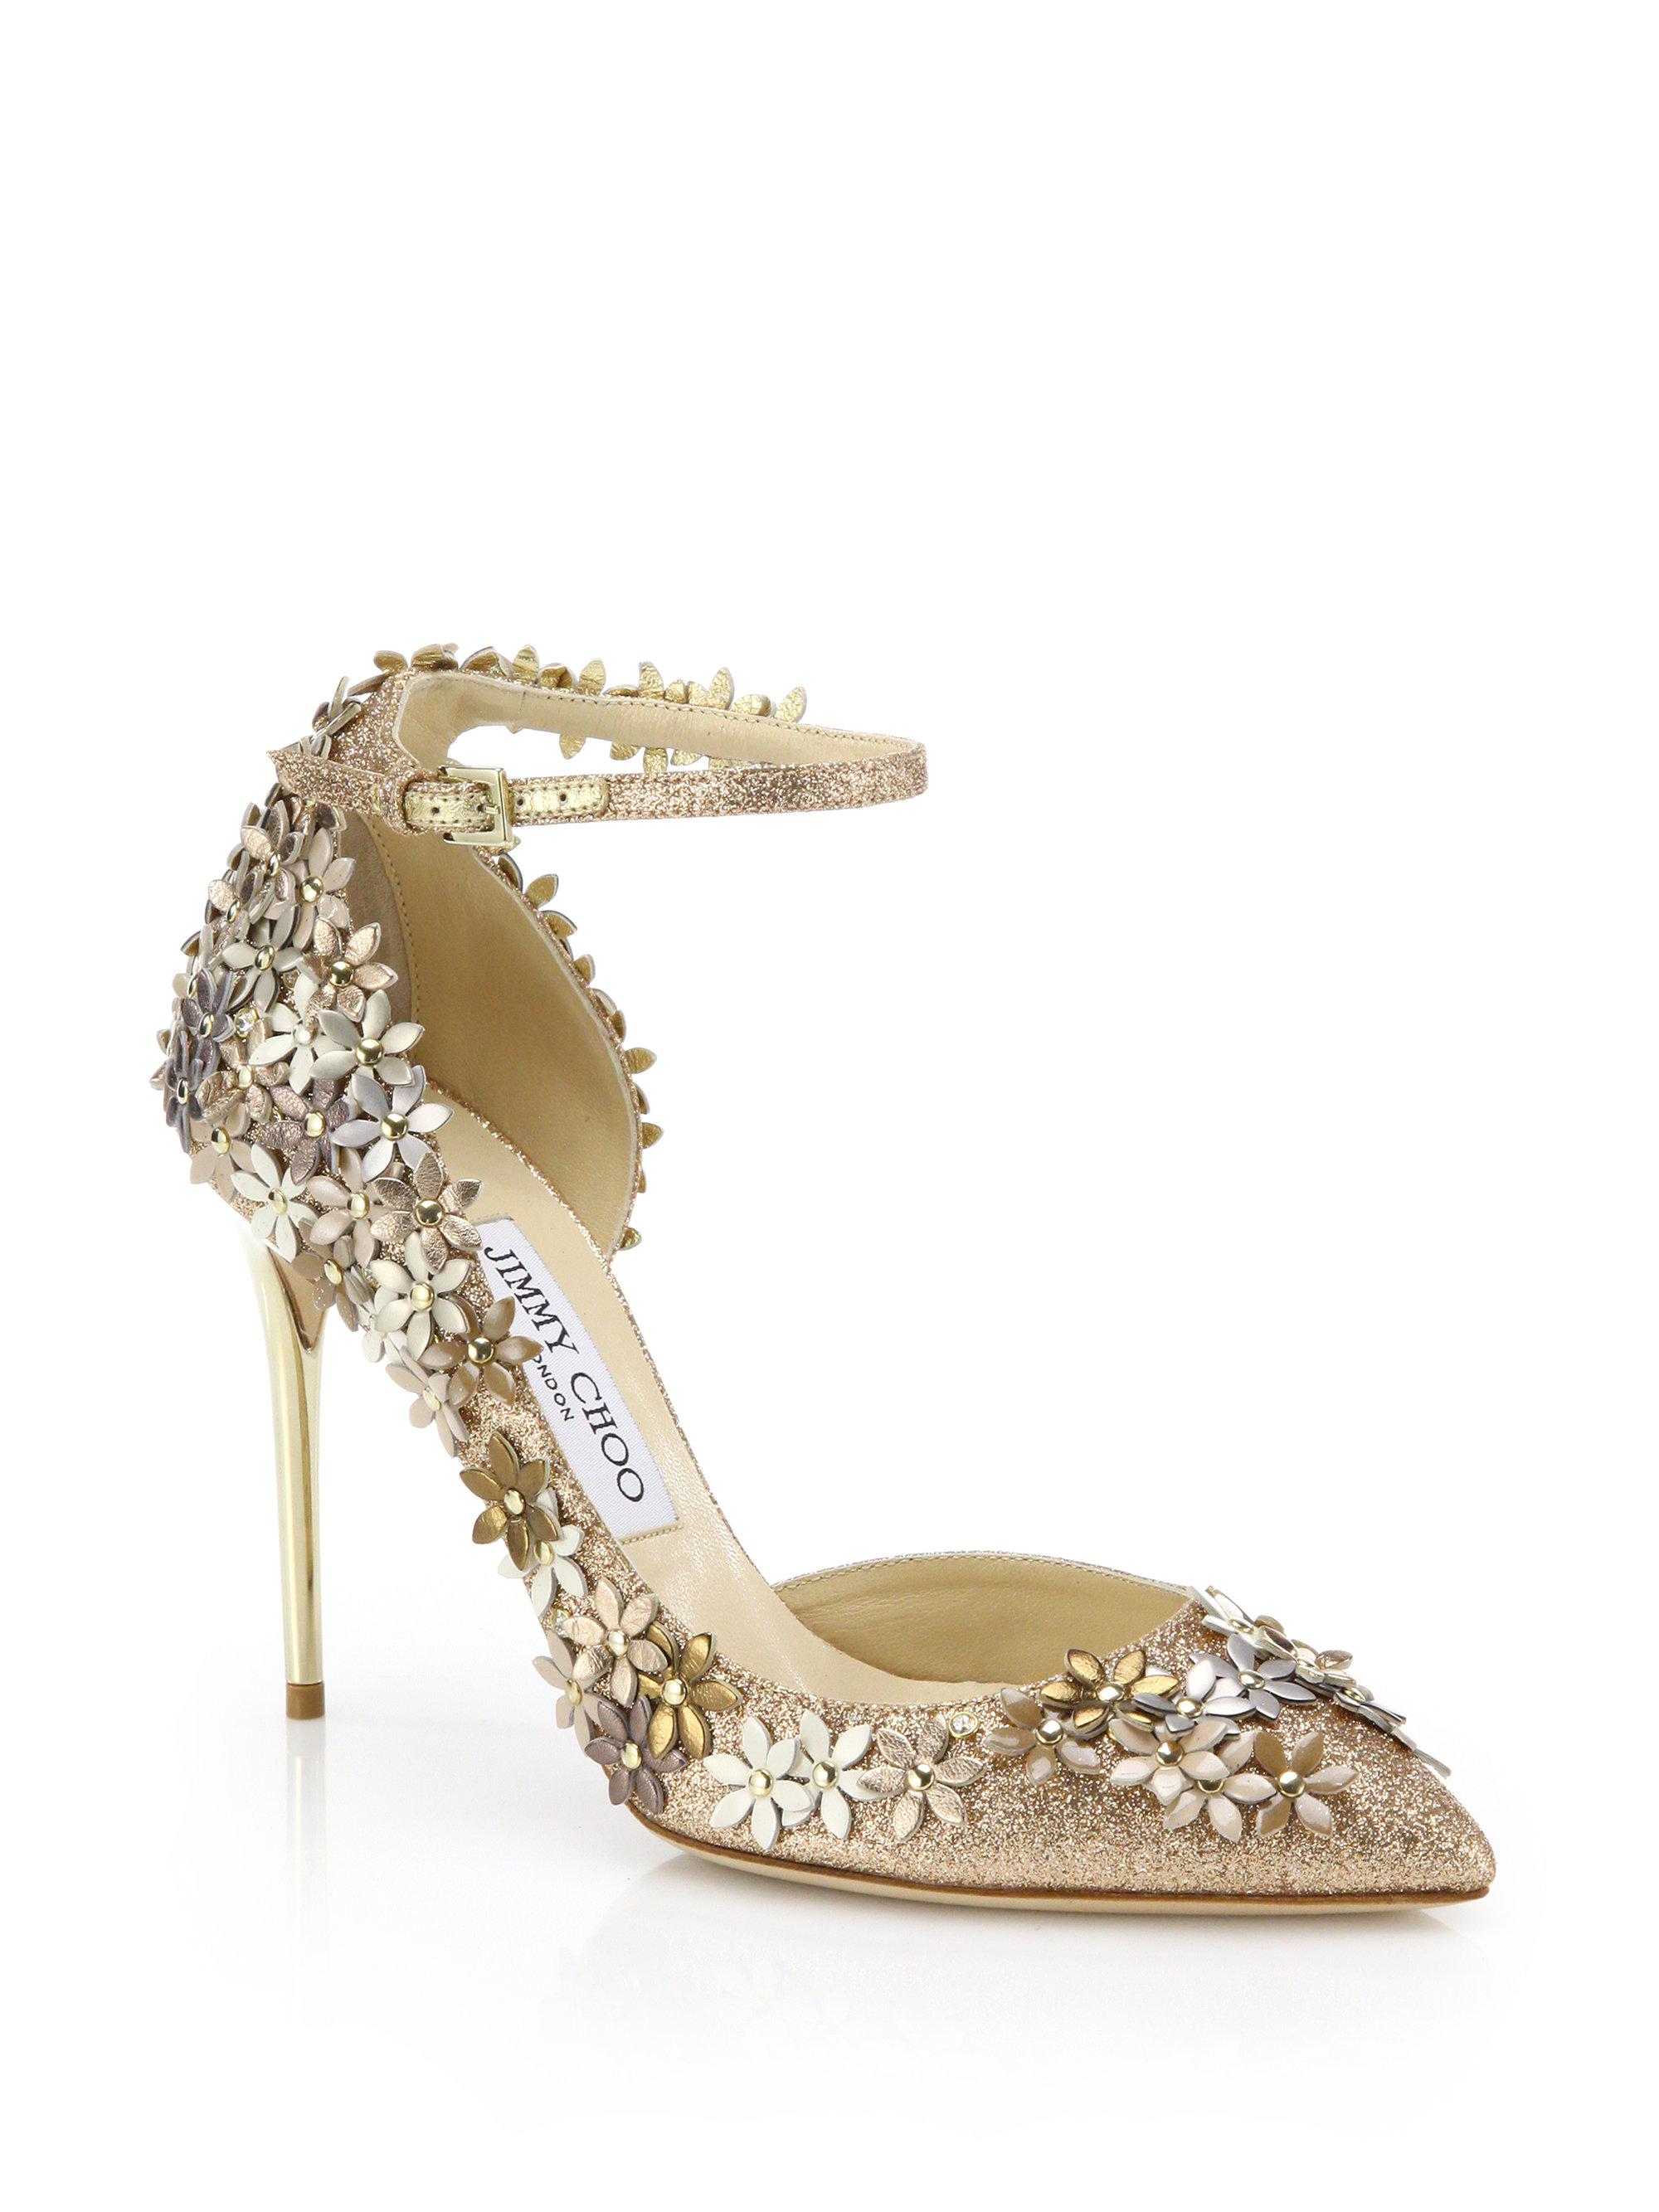 Lyst - Jimmy Choo Lorelai 100 Floral Glittered Leather Ankle-strap ...